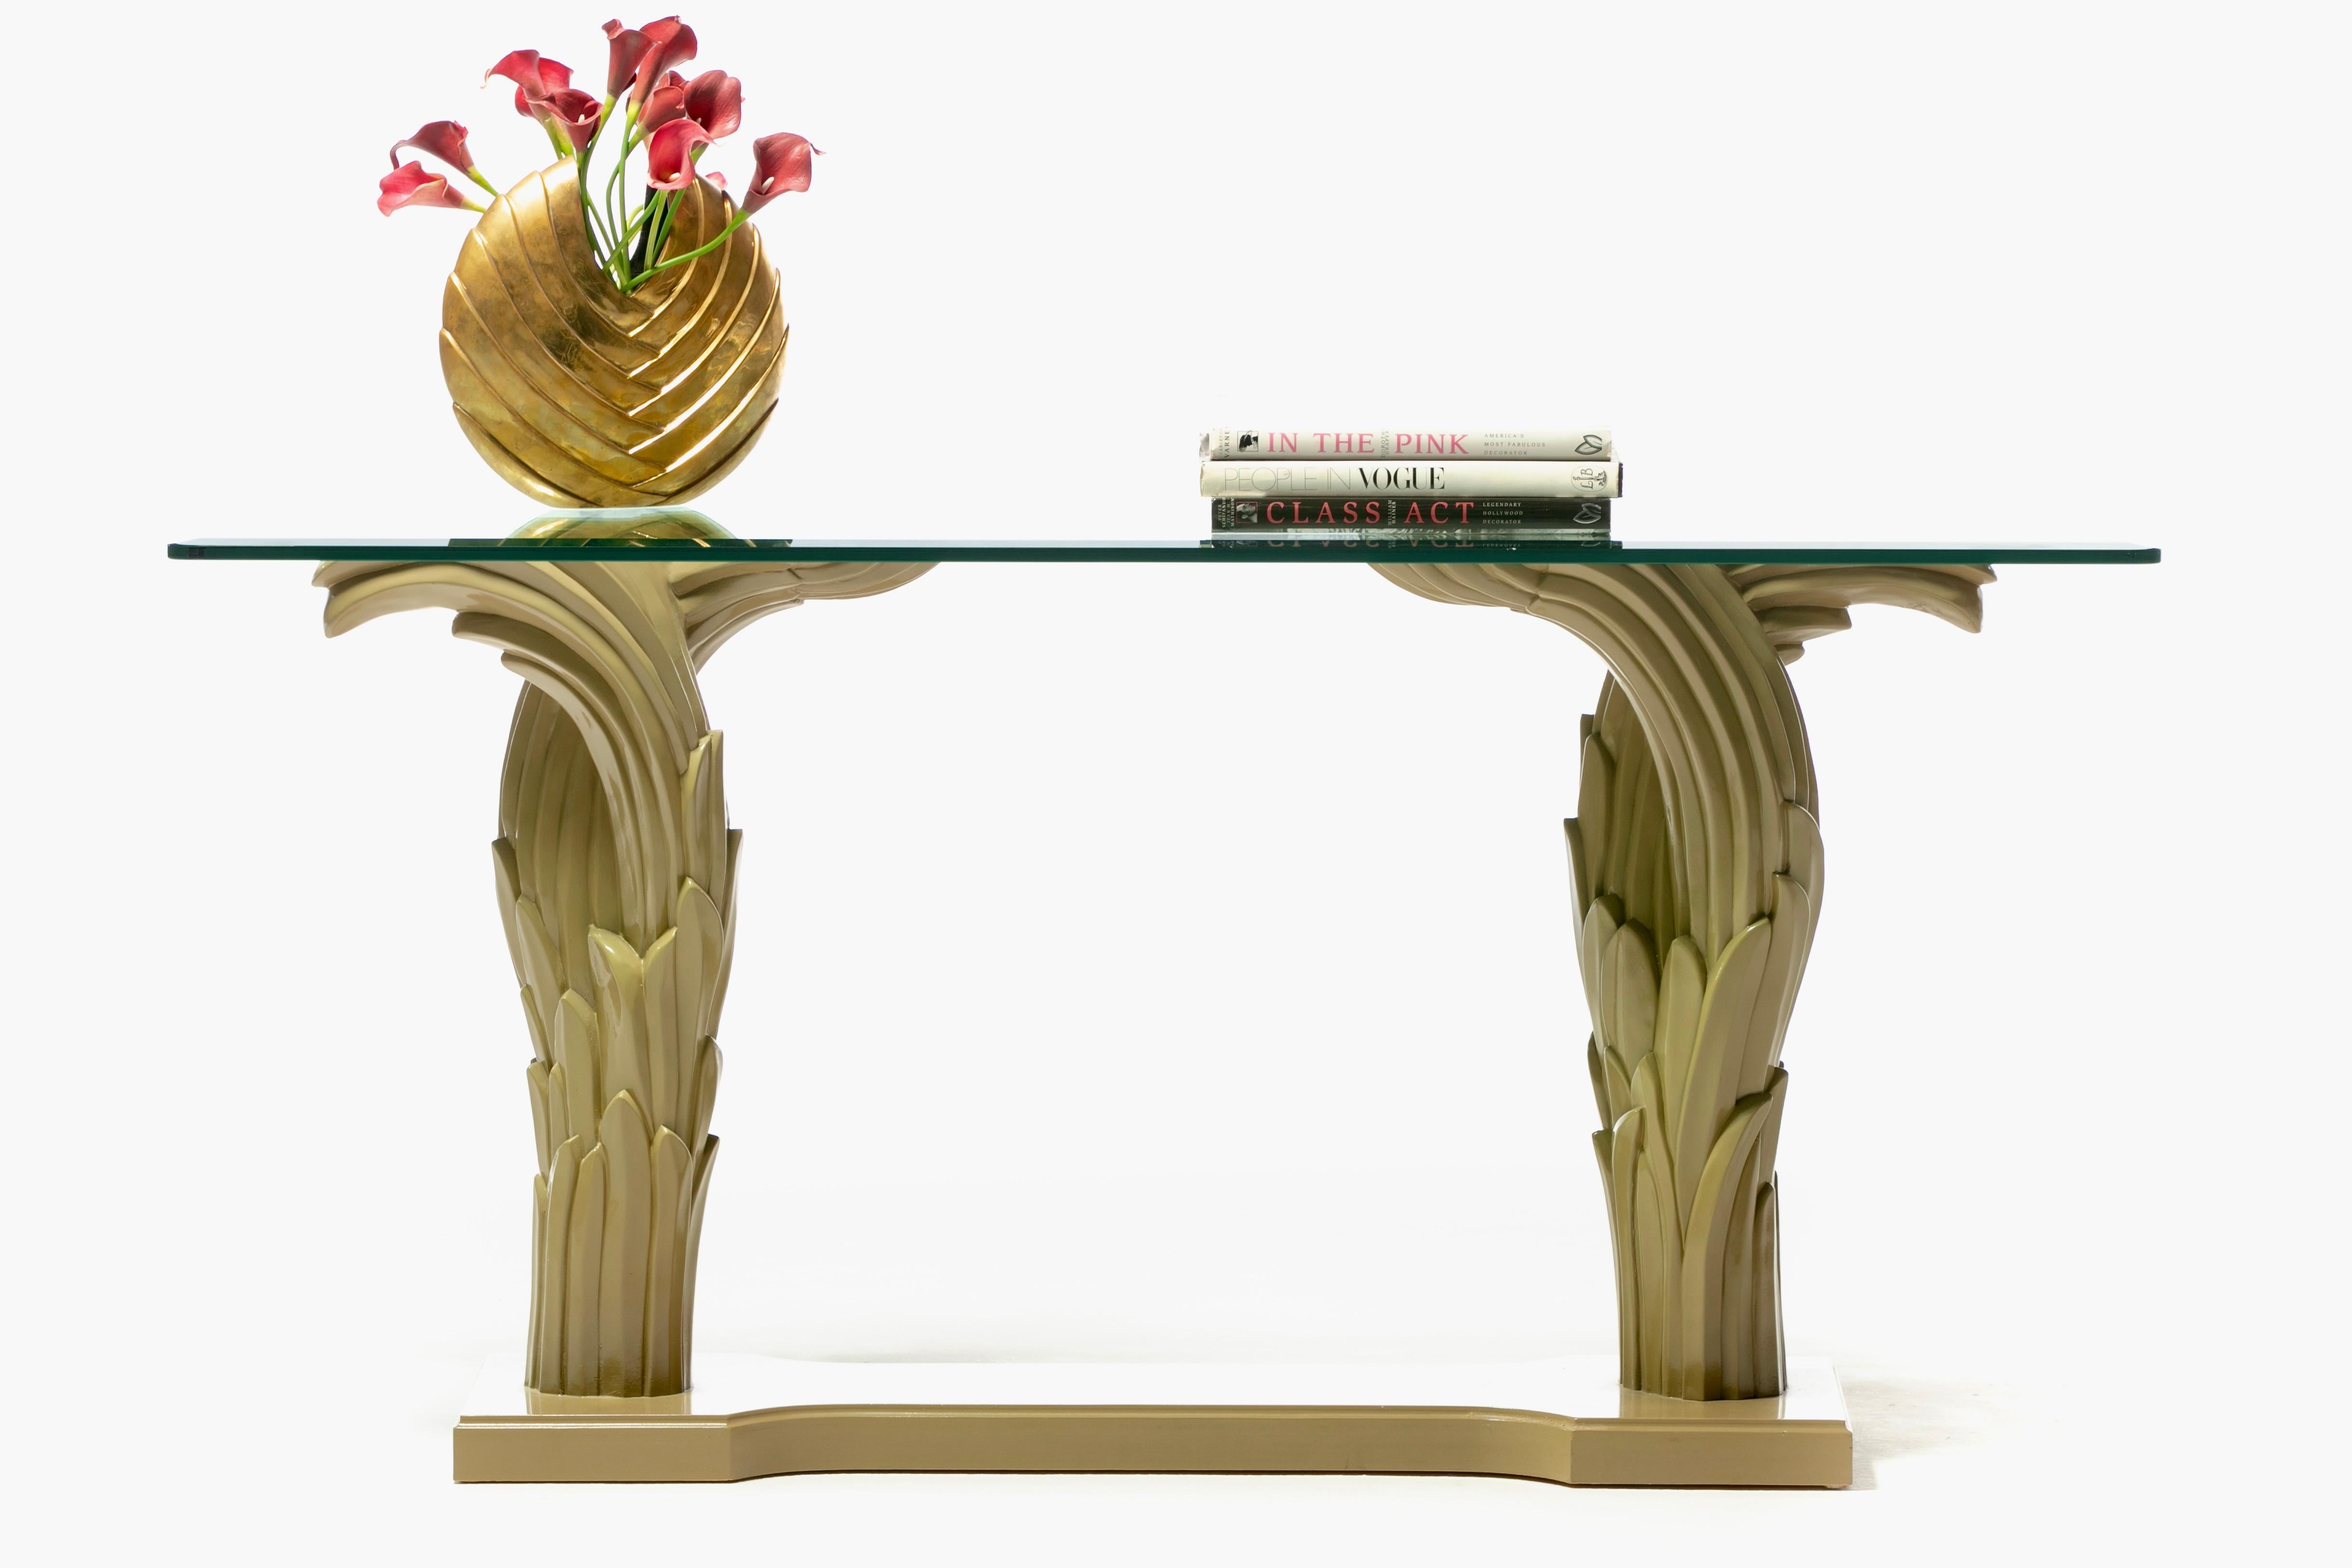 Dramatic Art Deco Style Palm Leaf console lacquered in eye catching almond latte lacquer with a beveled edge tempered glass top. French Riviera inspired elegance. Glamorous. Gregarious. Palm leaf forms reminisce of pieces by celebrated French